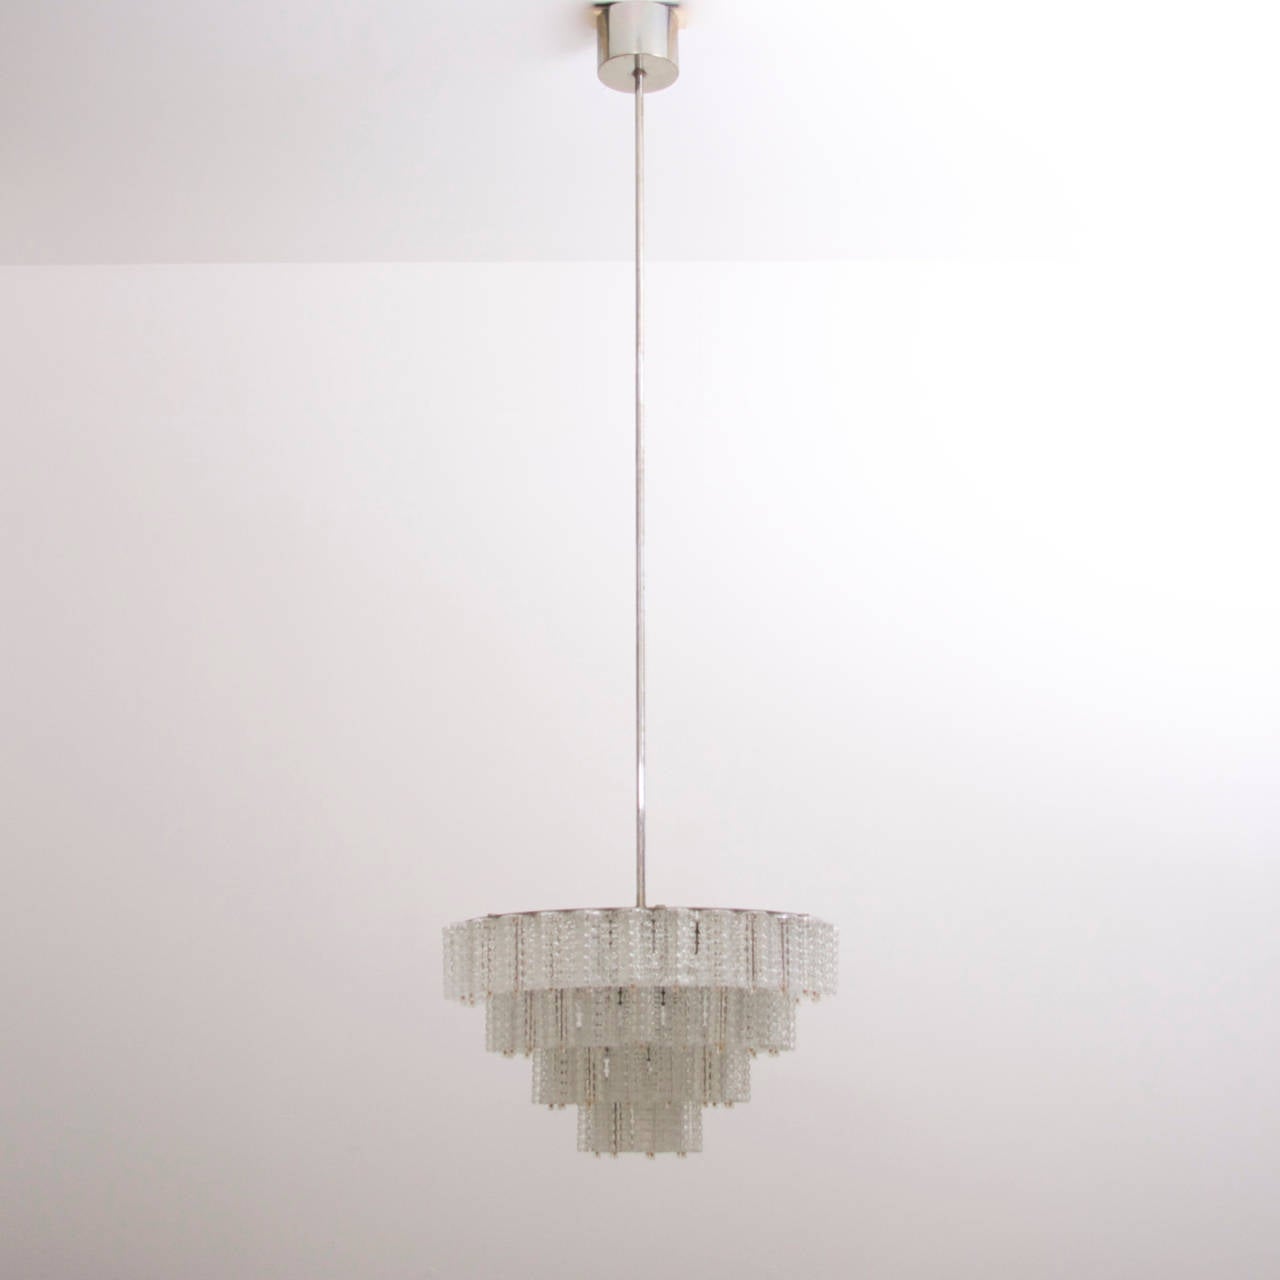 Wonderful and rare glass chandeliers by Austrian high end manufacturer Austrolux. The chandeliers are high quality production from the 1960s. The light shines through the structured glasses and brings a cozy atmosphere in every room. The chandeliers